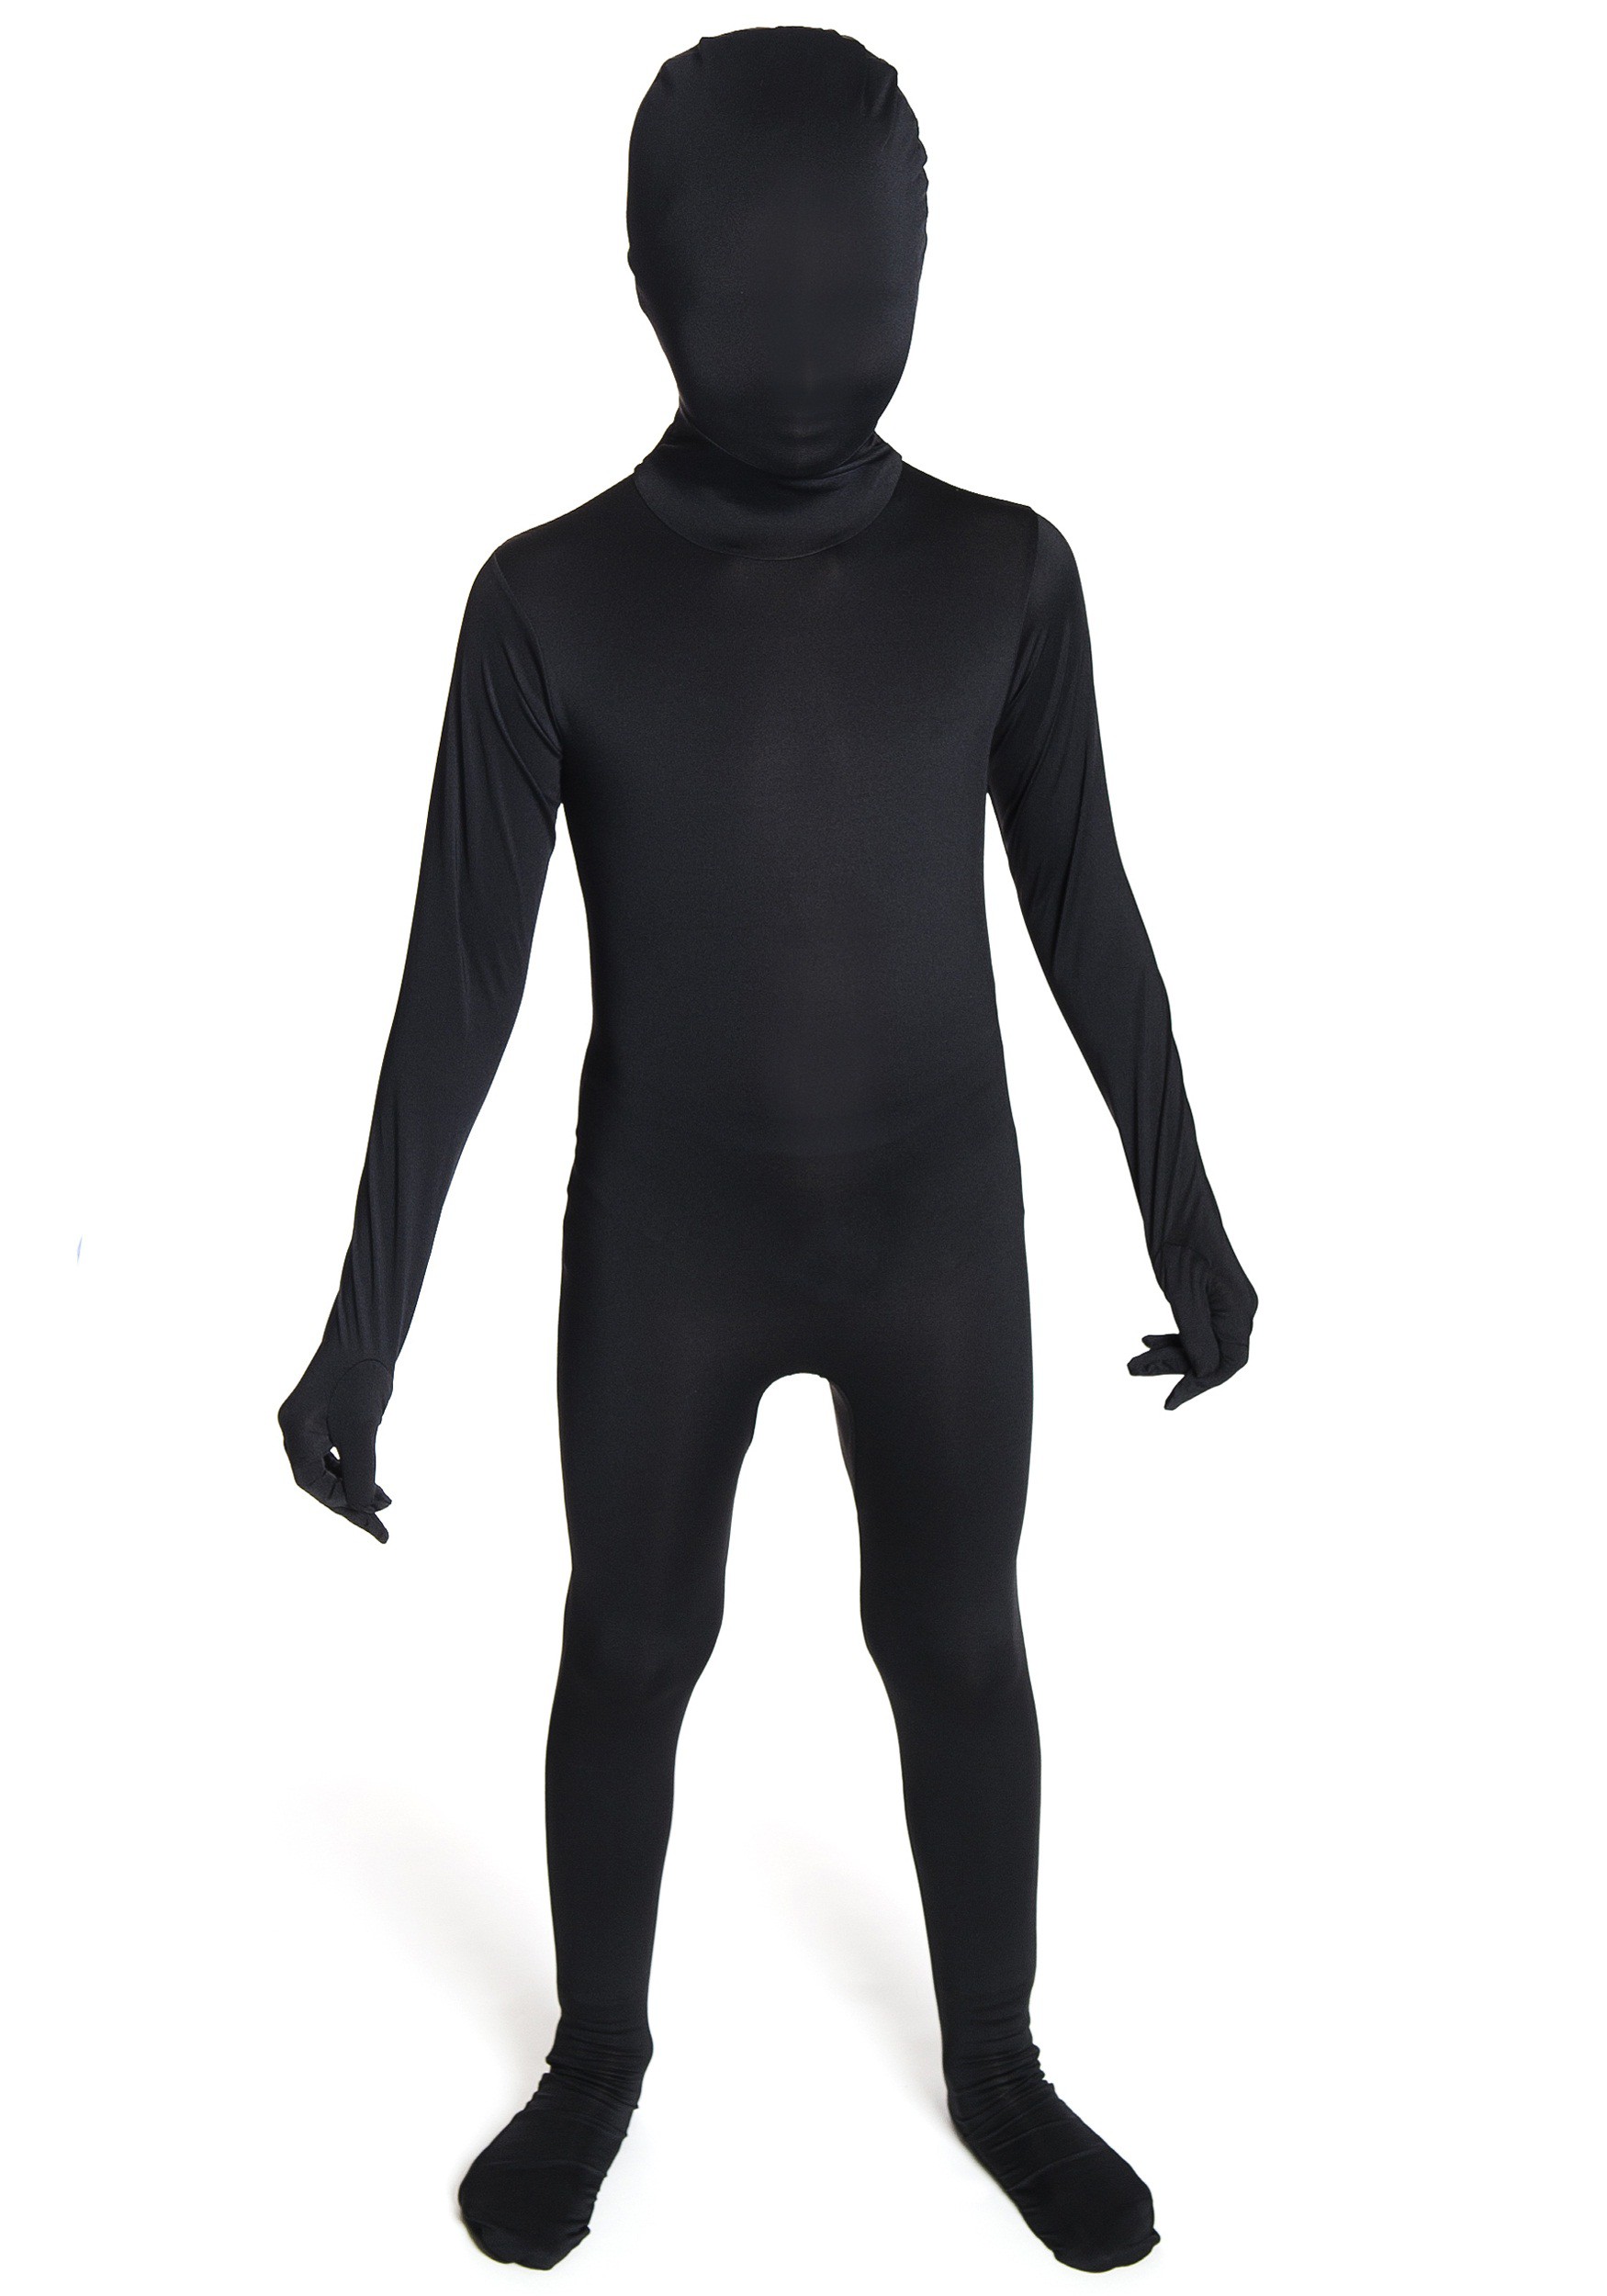 https://images.halloweencostumes.ca/products/29766/1-1/child-black-morphsuit.jpg